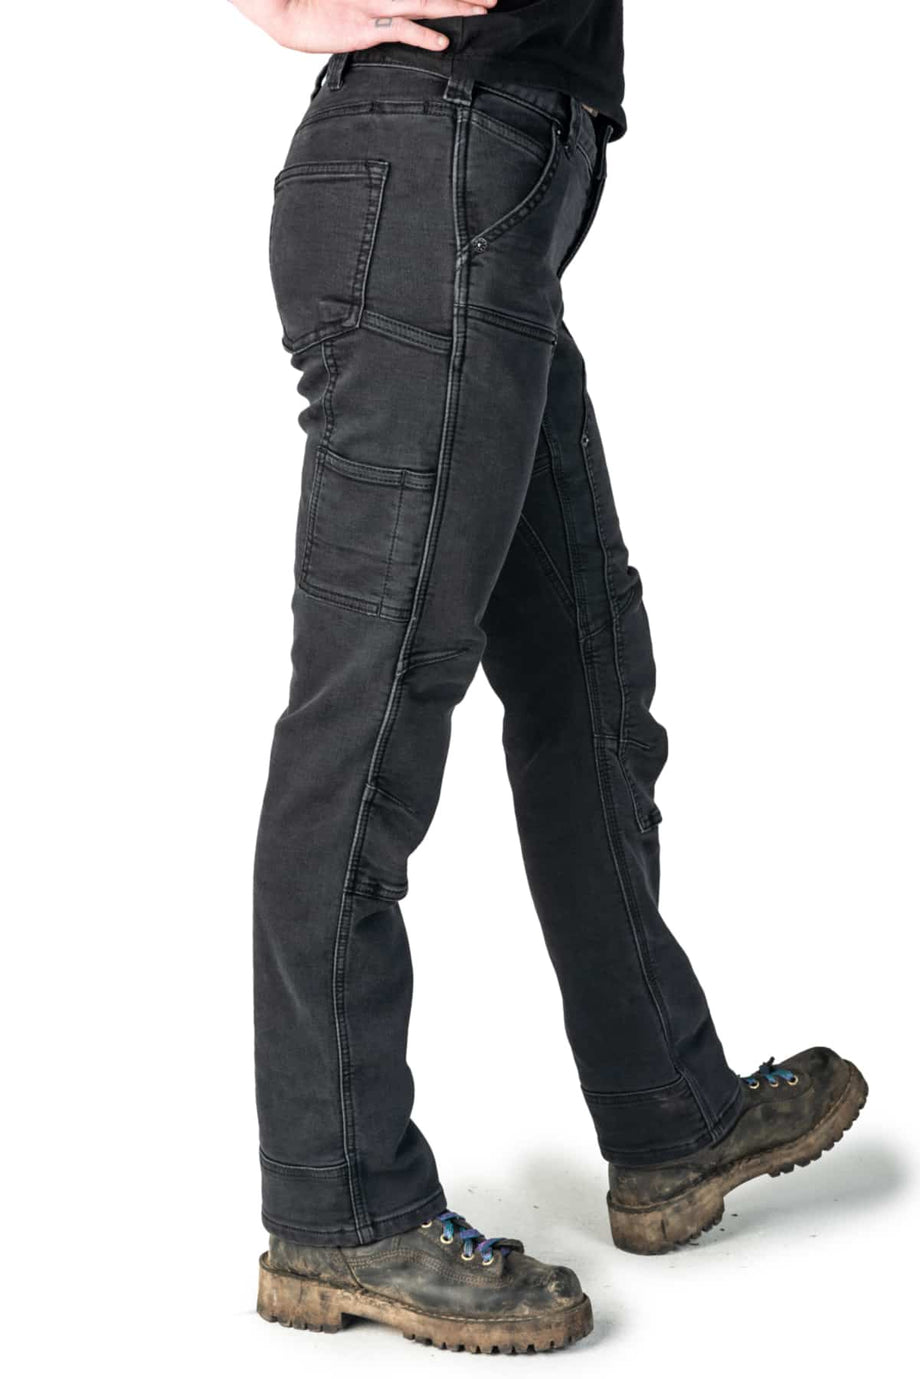 Dovetail Workwear Women's Saddle Brown Canvas Work Pants (8 X 30) in the  Pants department at